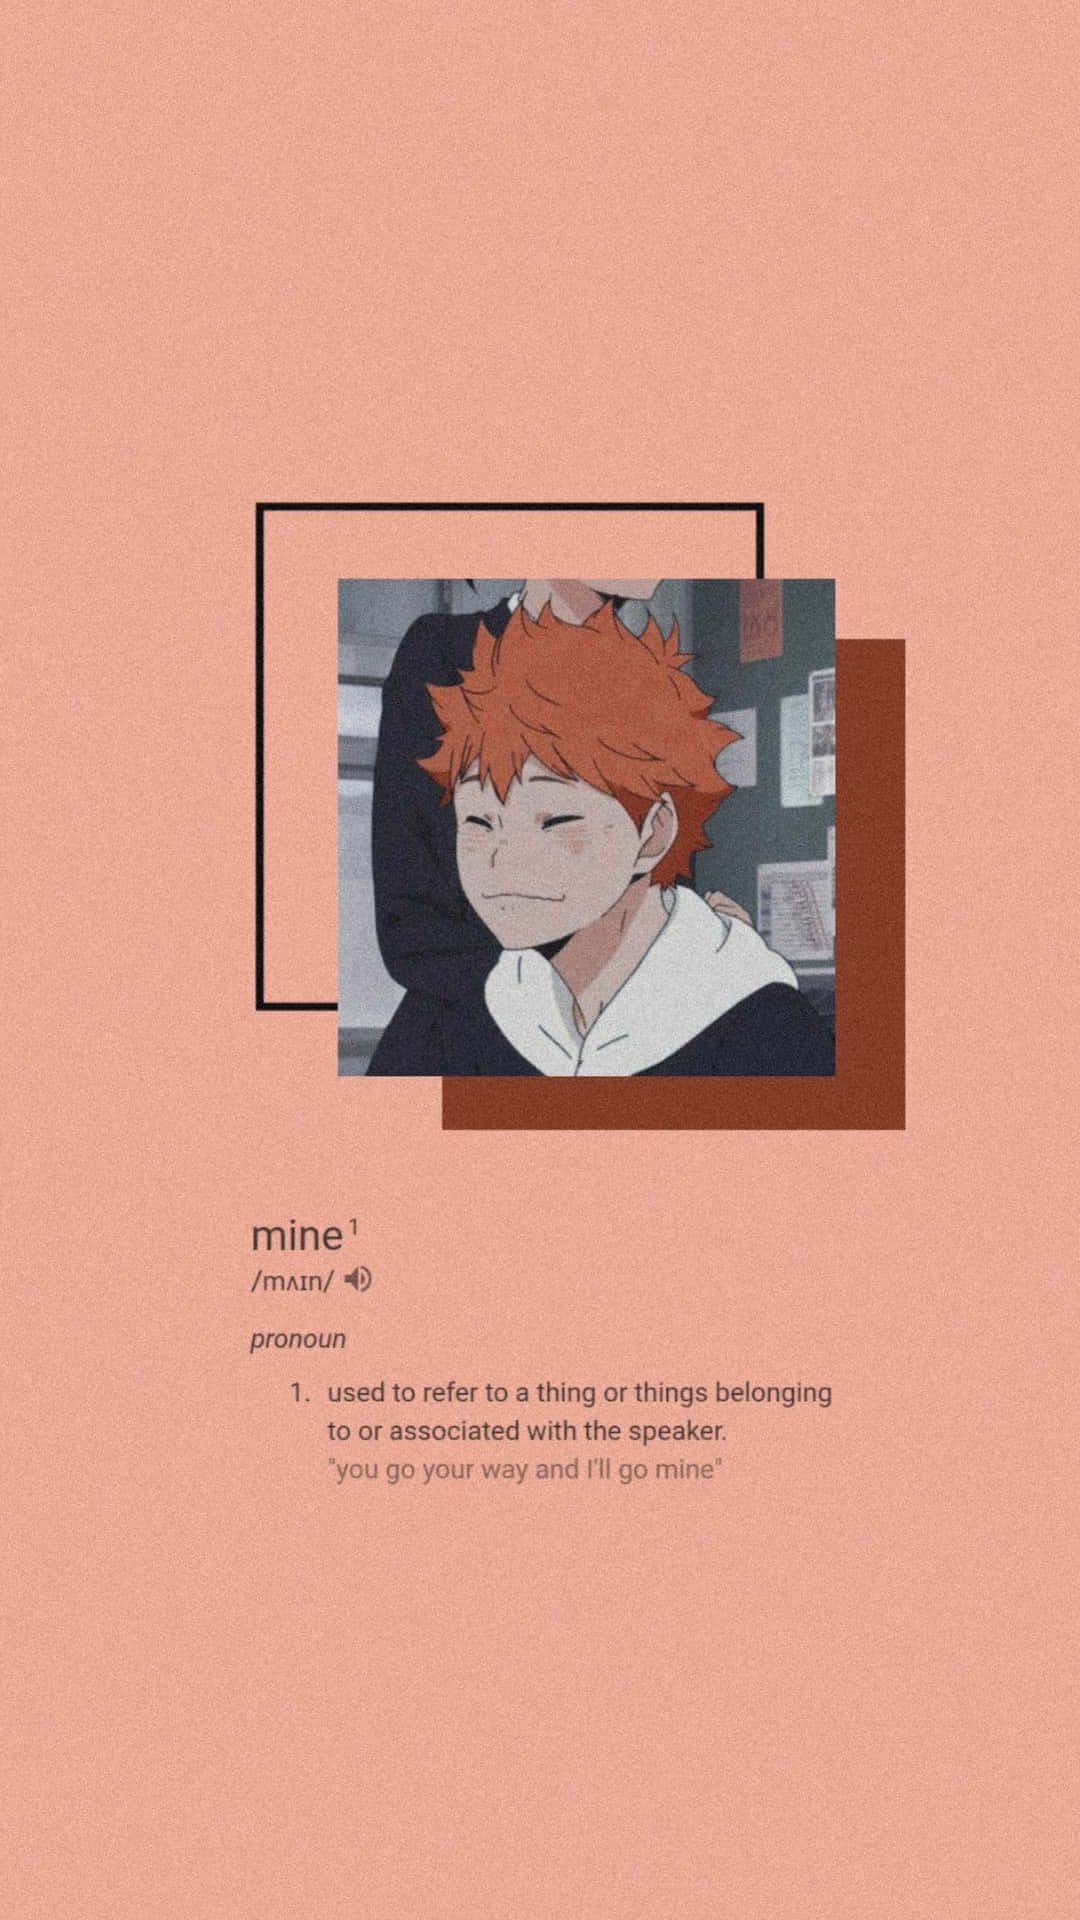 Haikyuu Character Smiling With Definition Wallpaper